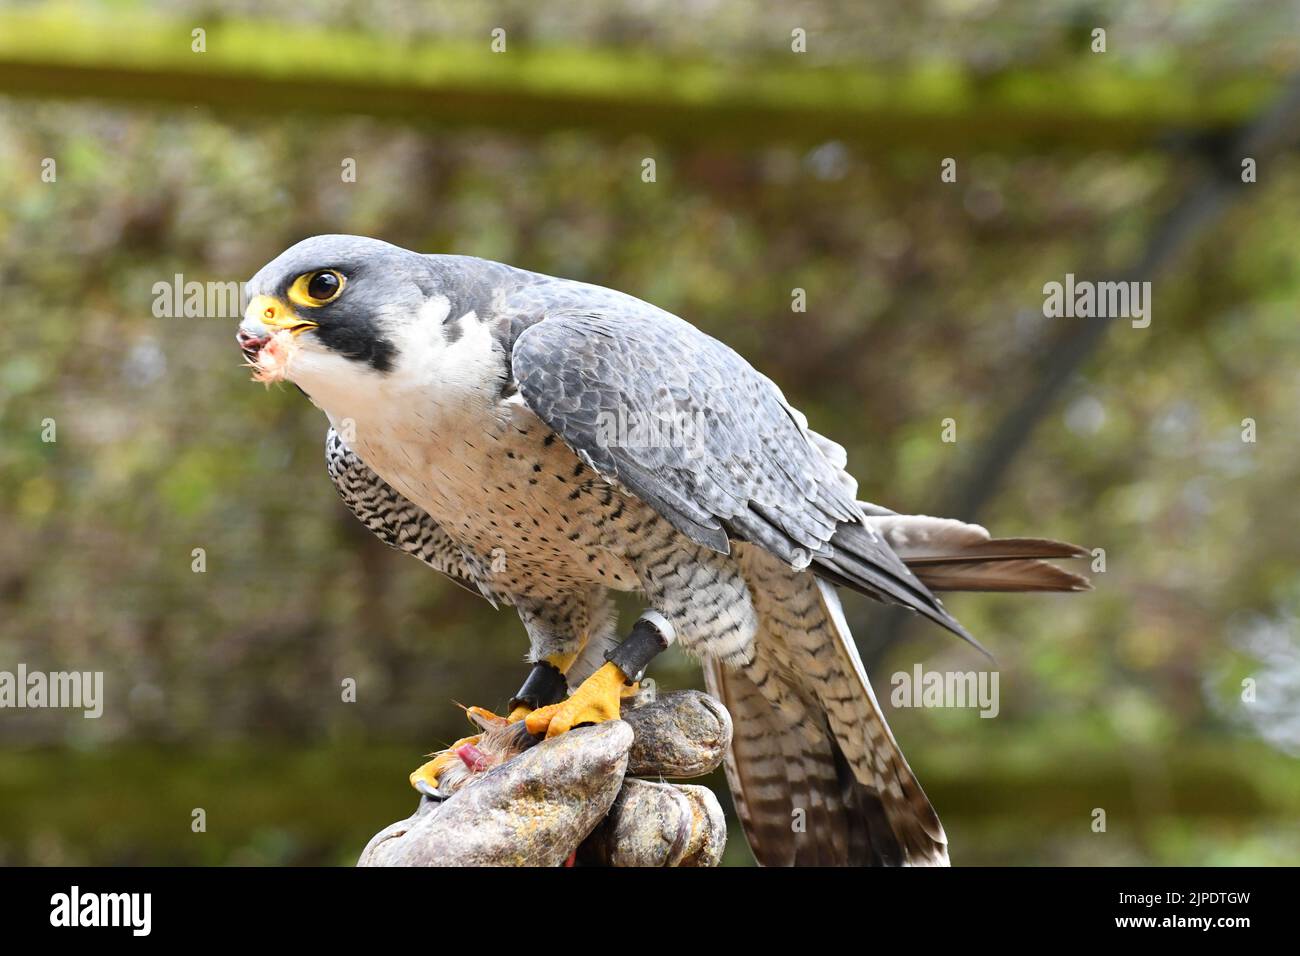 Peregrine falcon at The Cotswold Falconry Centre, Moreton in Marsh, Gloucestershire, England, UK Stock Photo